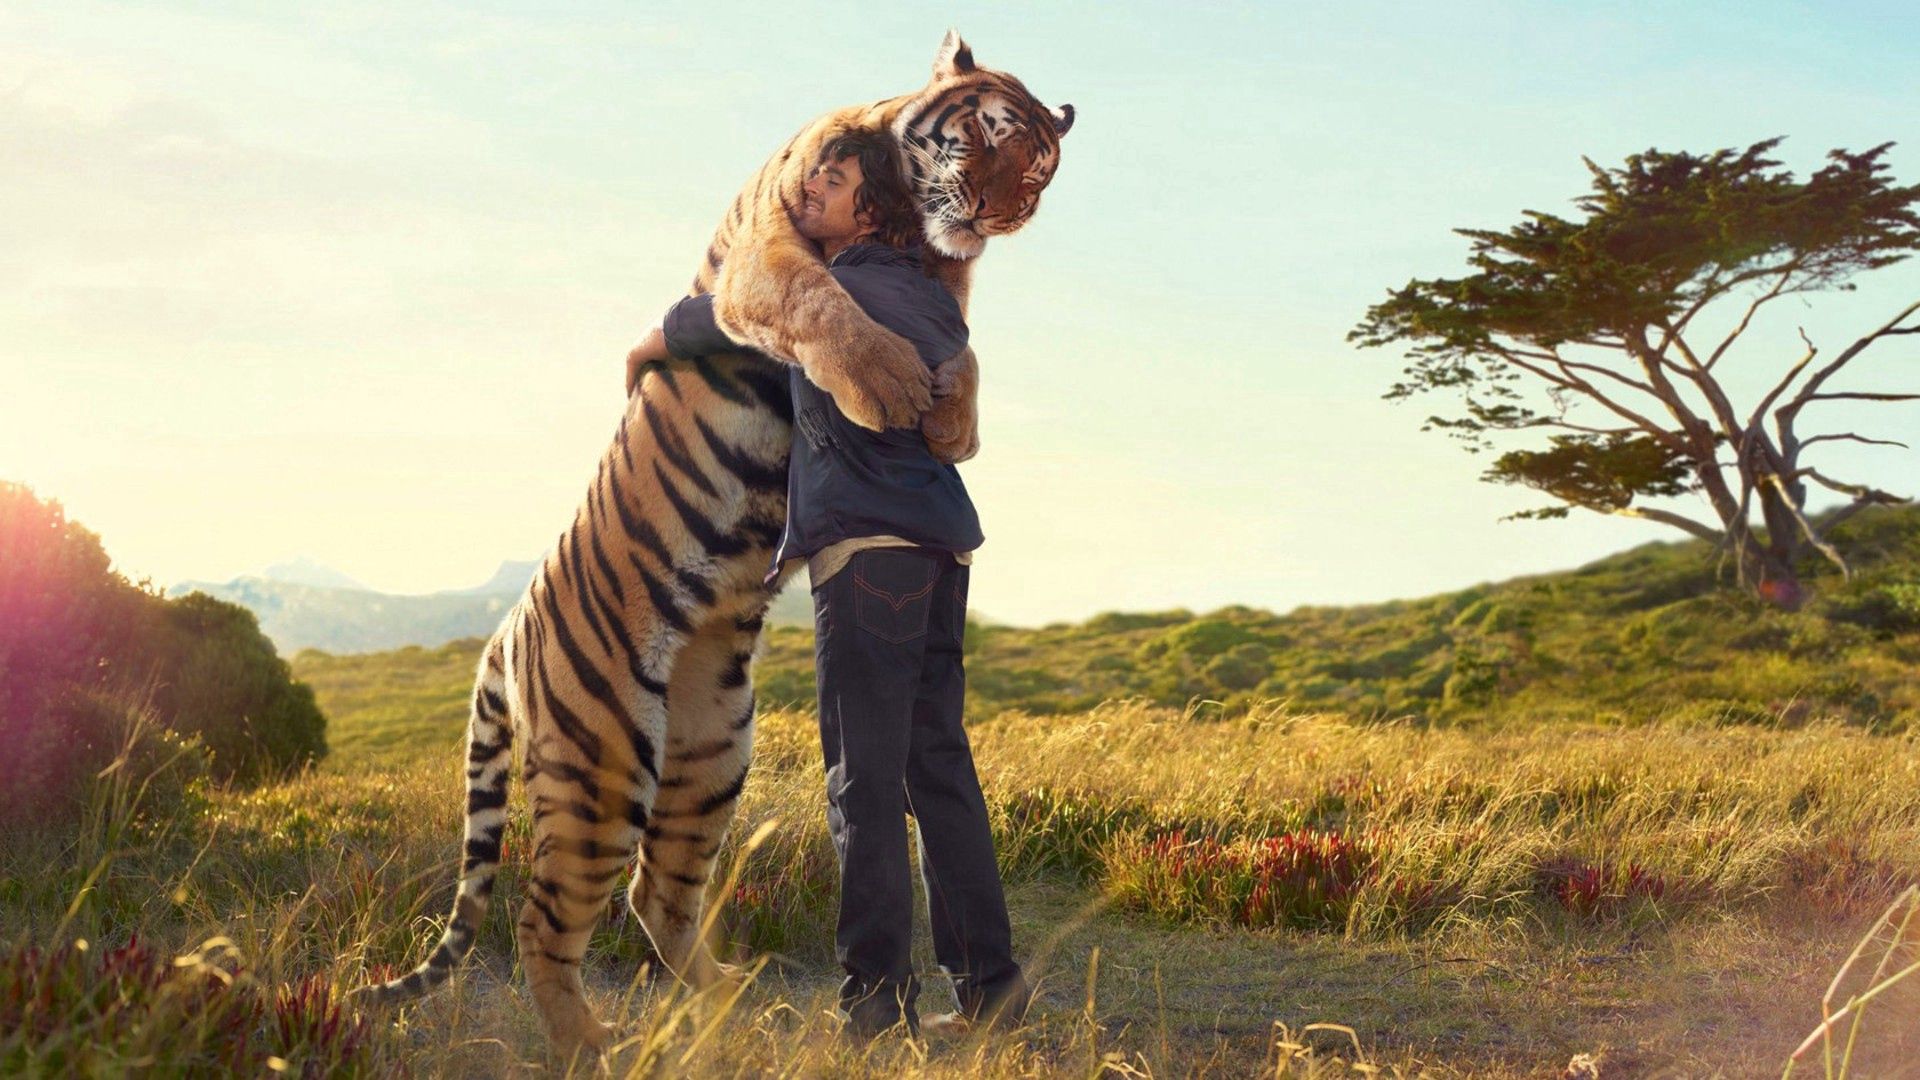 miscellanea, miscellaneous, tiger, guy, embrace, situation, meeting